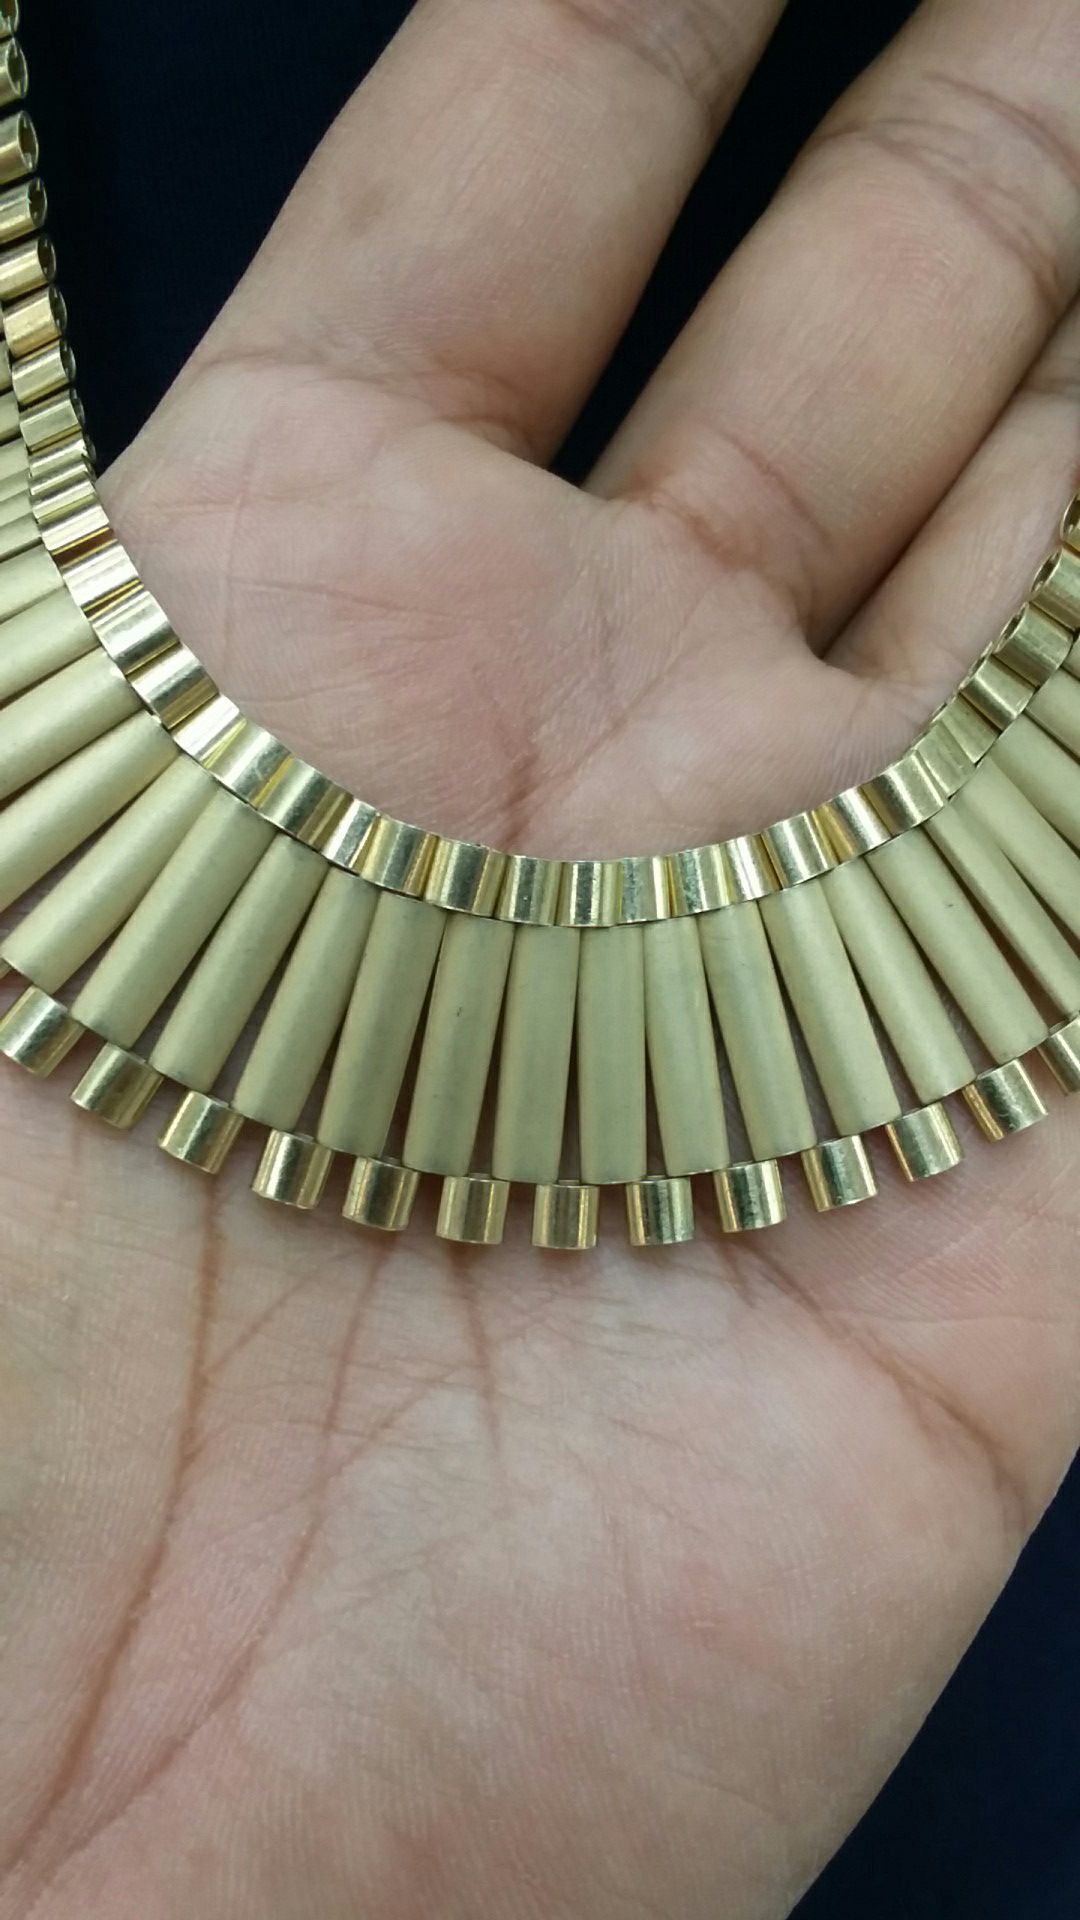 10k Gold Rolex Chain Very Hard To Find 115 grams 22 mm 31 inch long